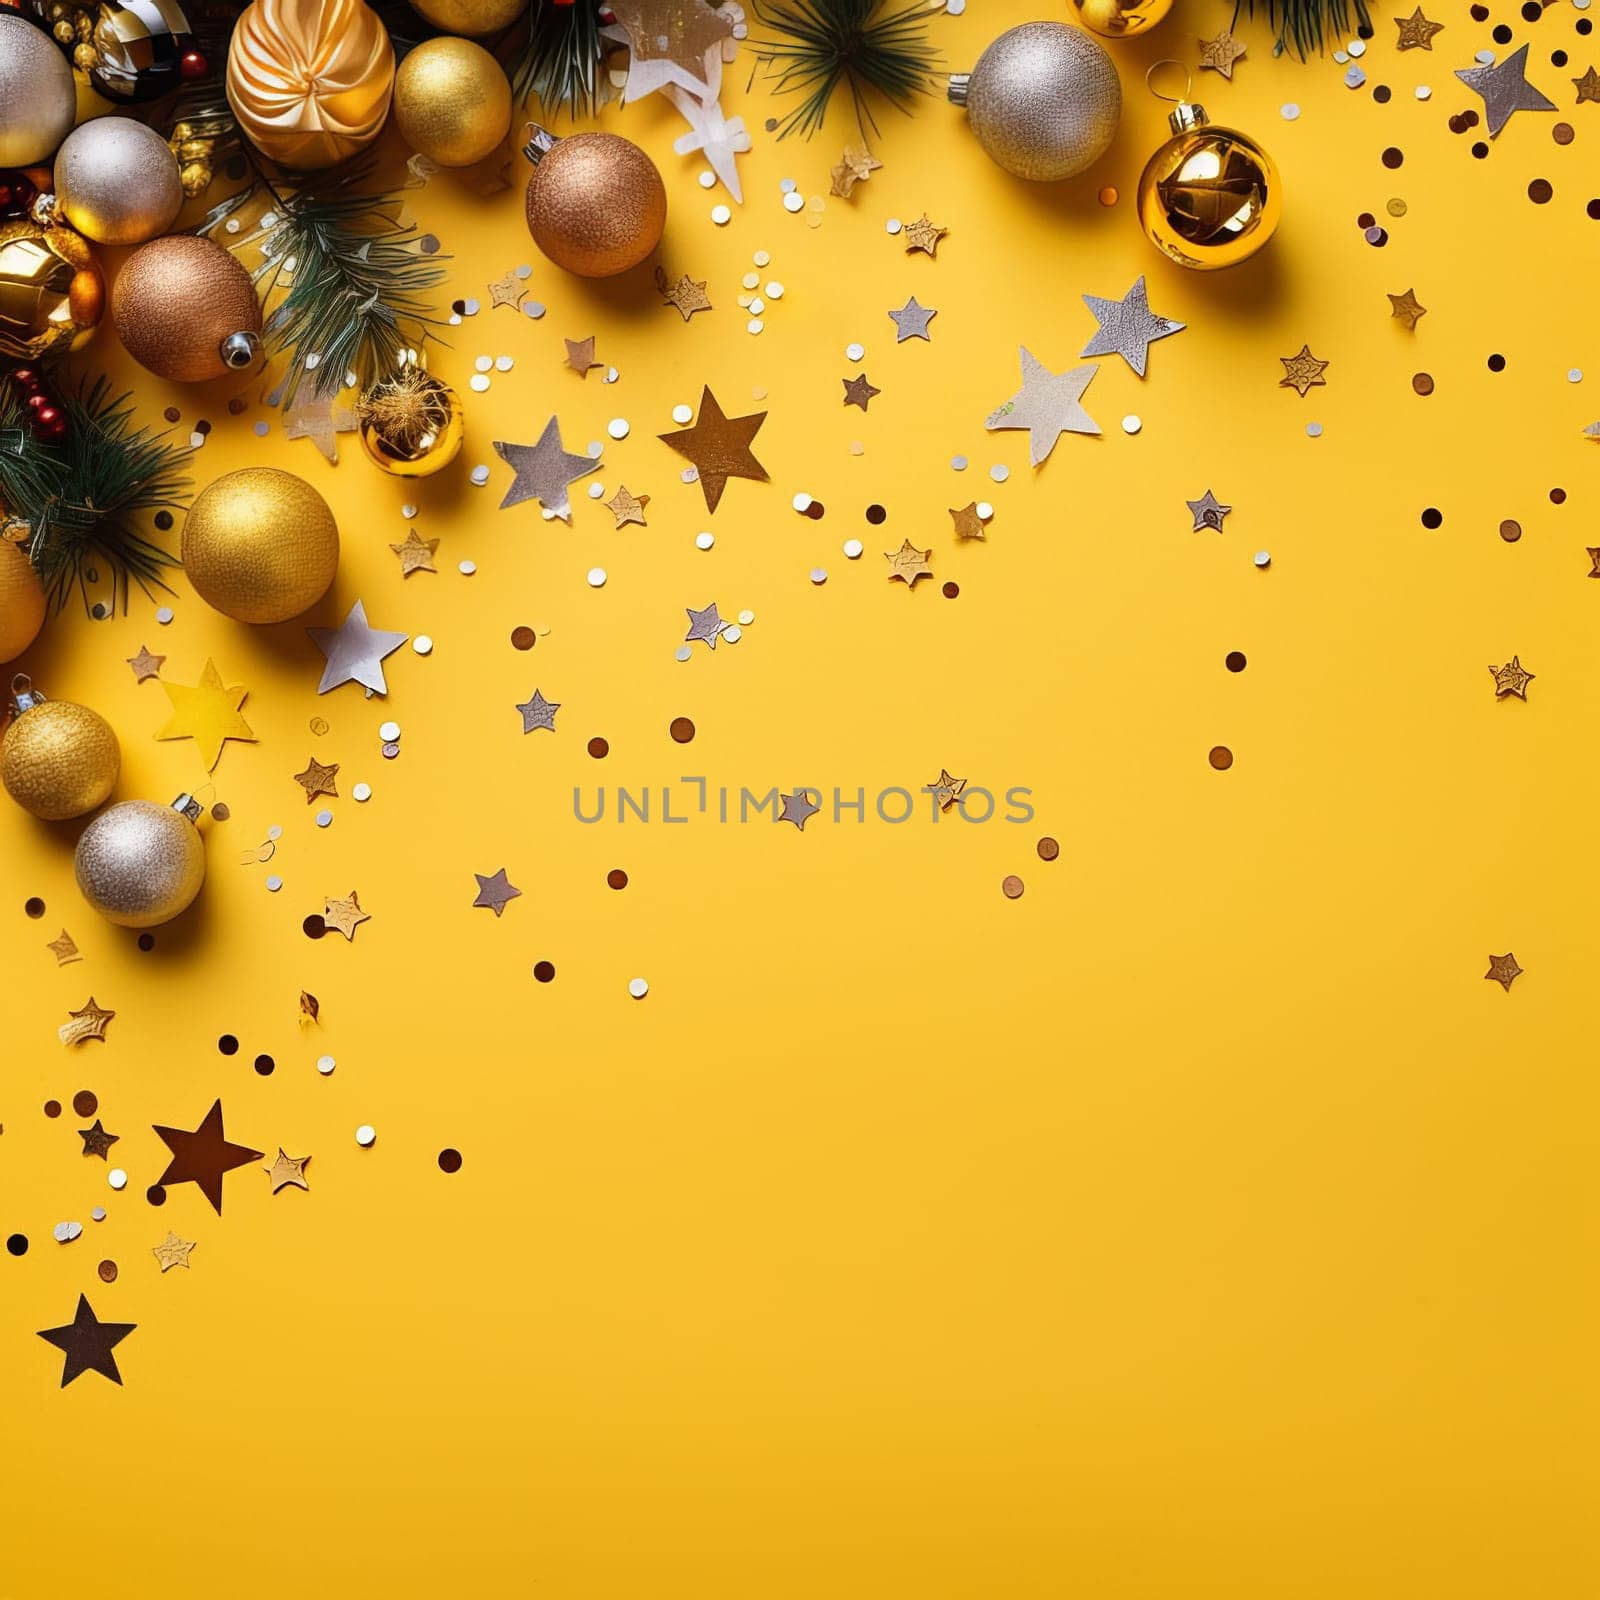 Luxury New Year's balls and toys on a yellow background on Christmas Eve by Alla_Yurtayeva